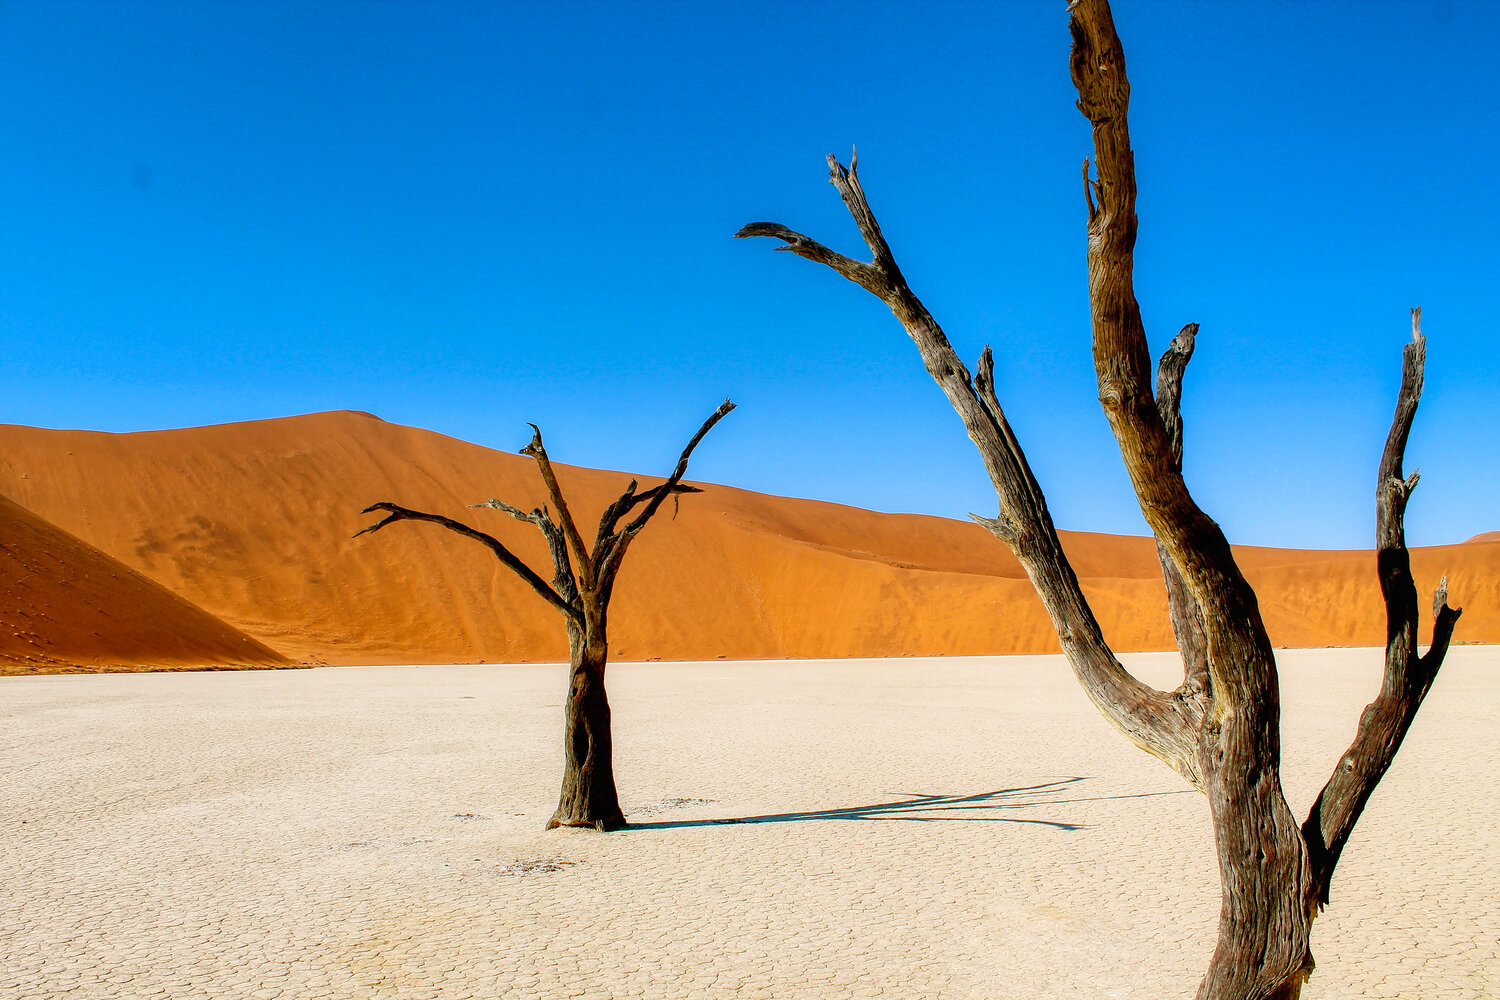 Can You Get at Least 75% On This 24-Question Geography Test Without Googling? Namib Desert, Namibia